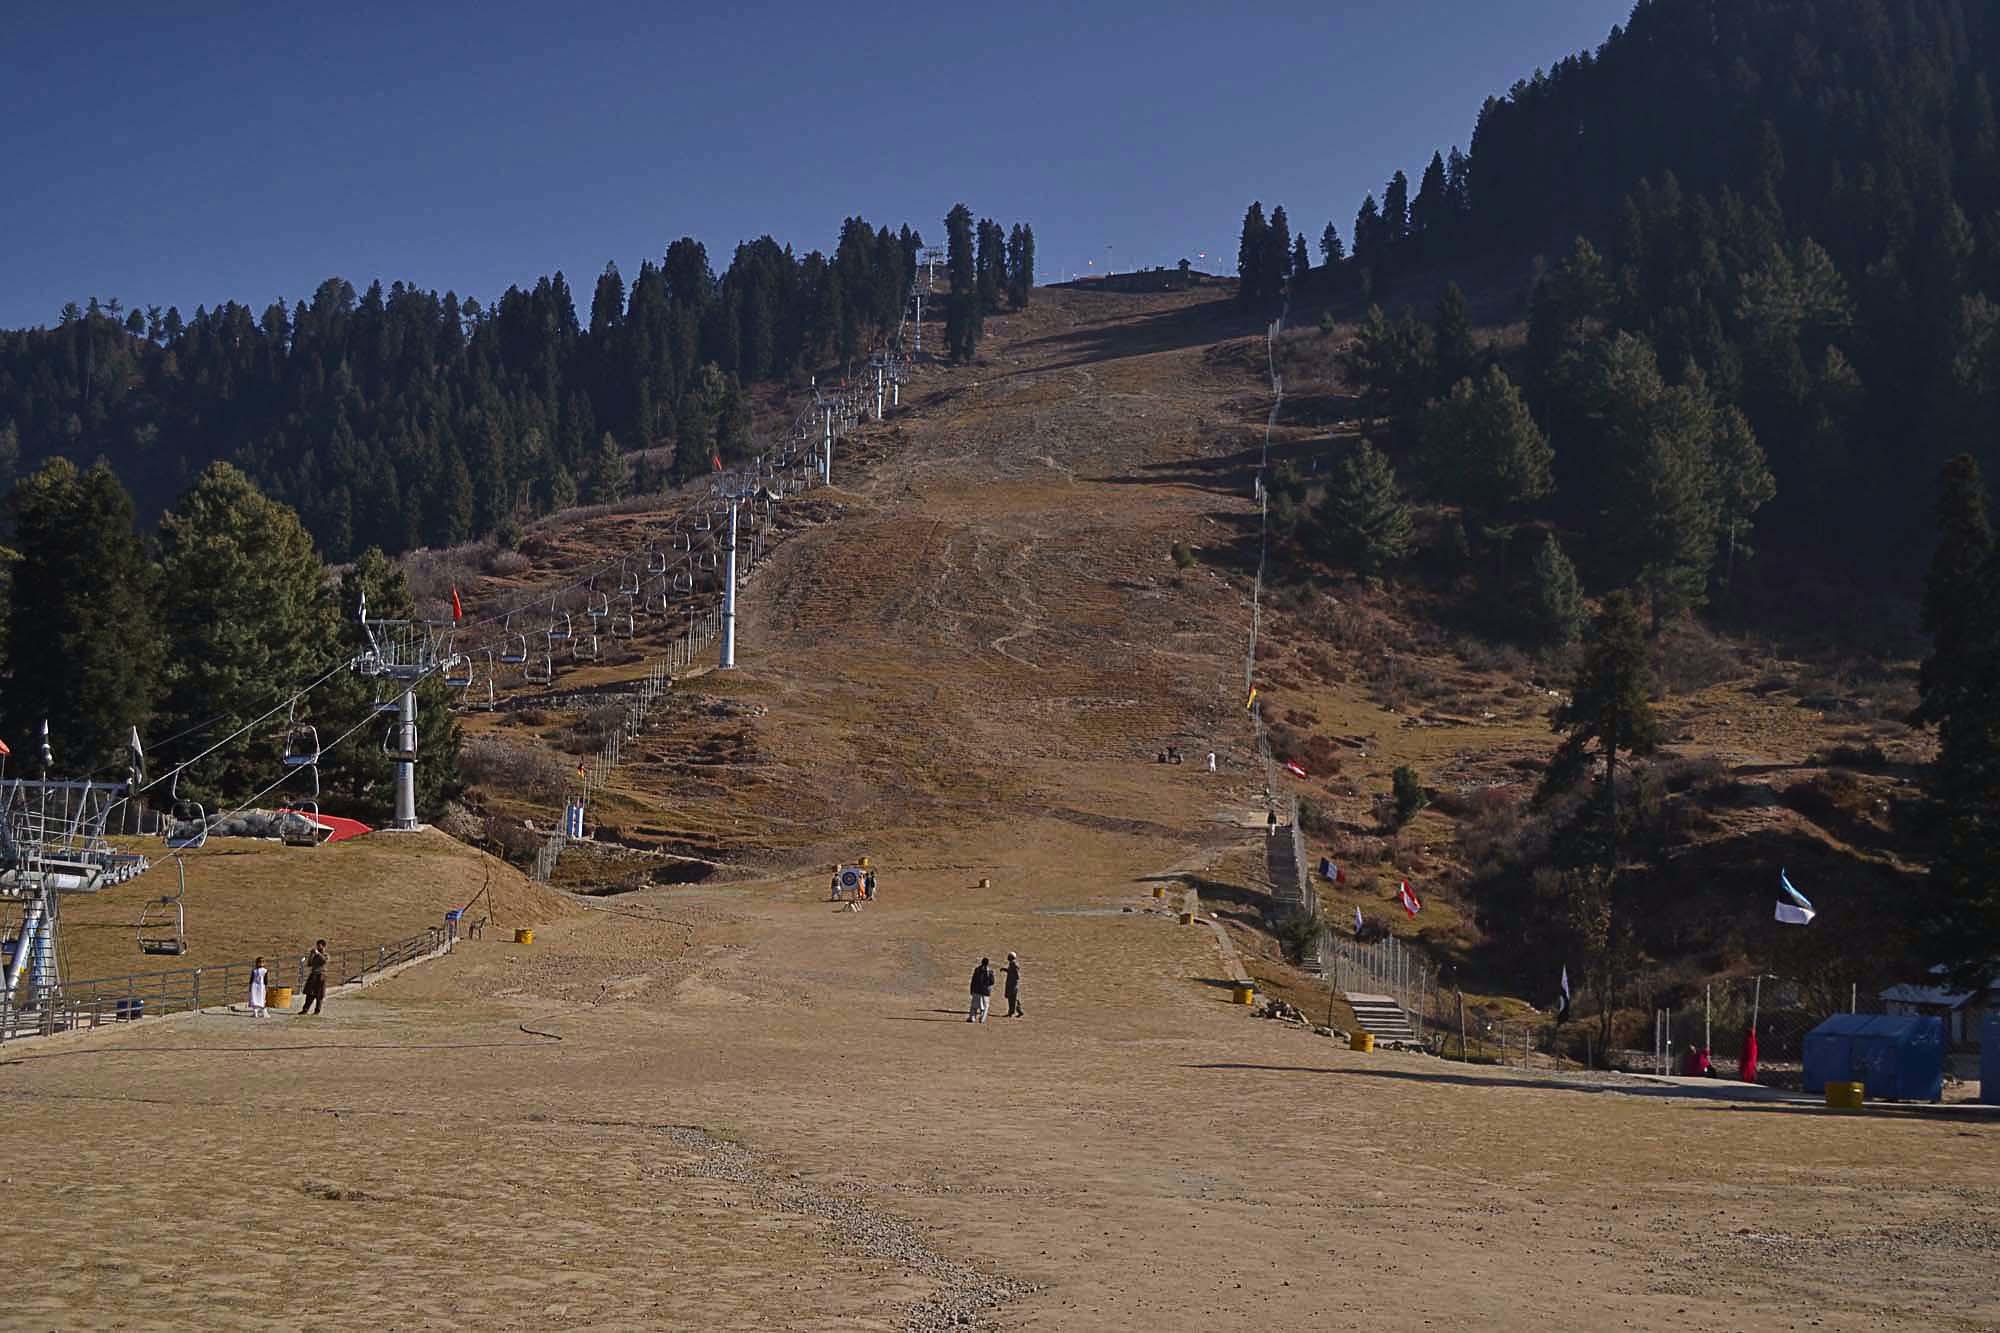 Malam Jabba skiing track in summers by Rizwan Mir